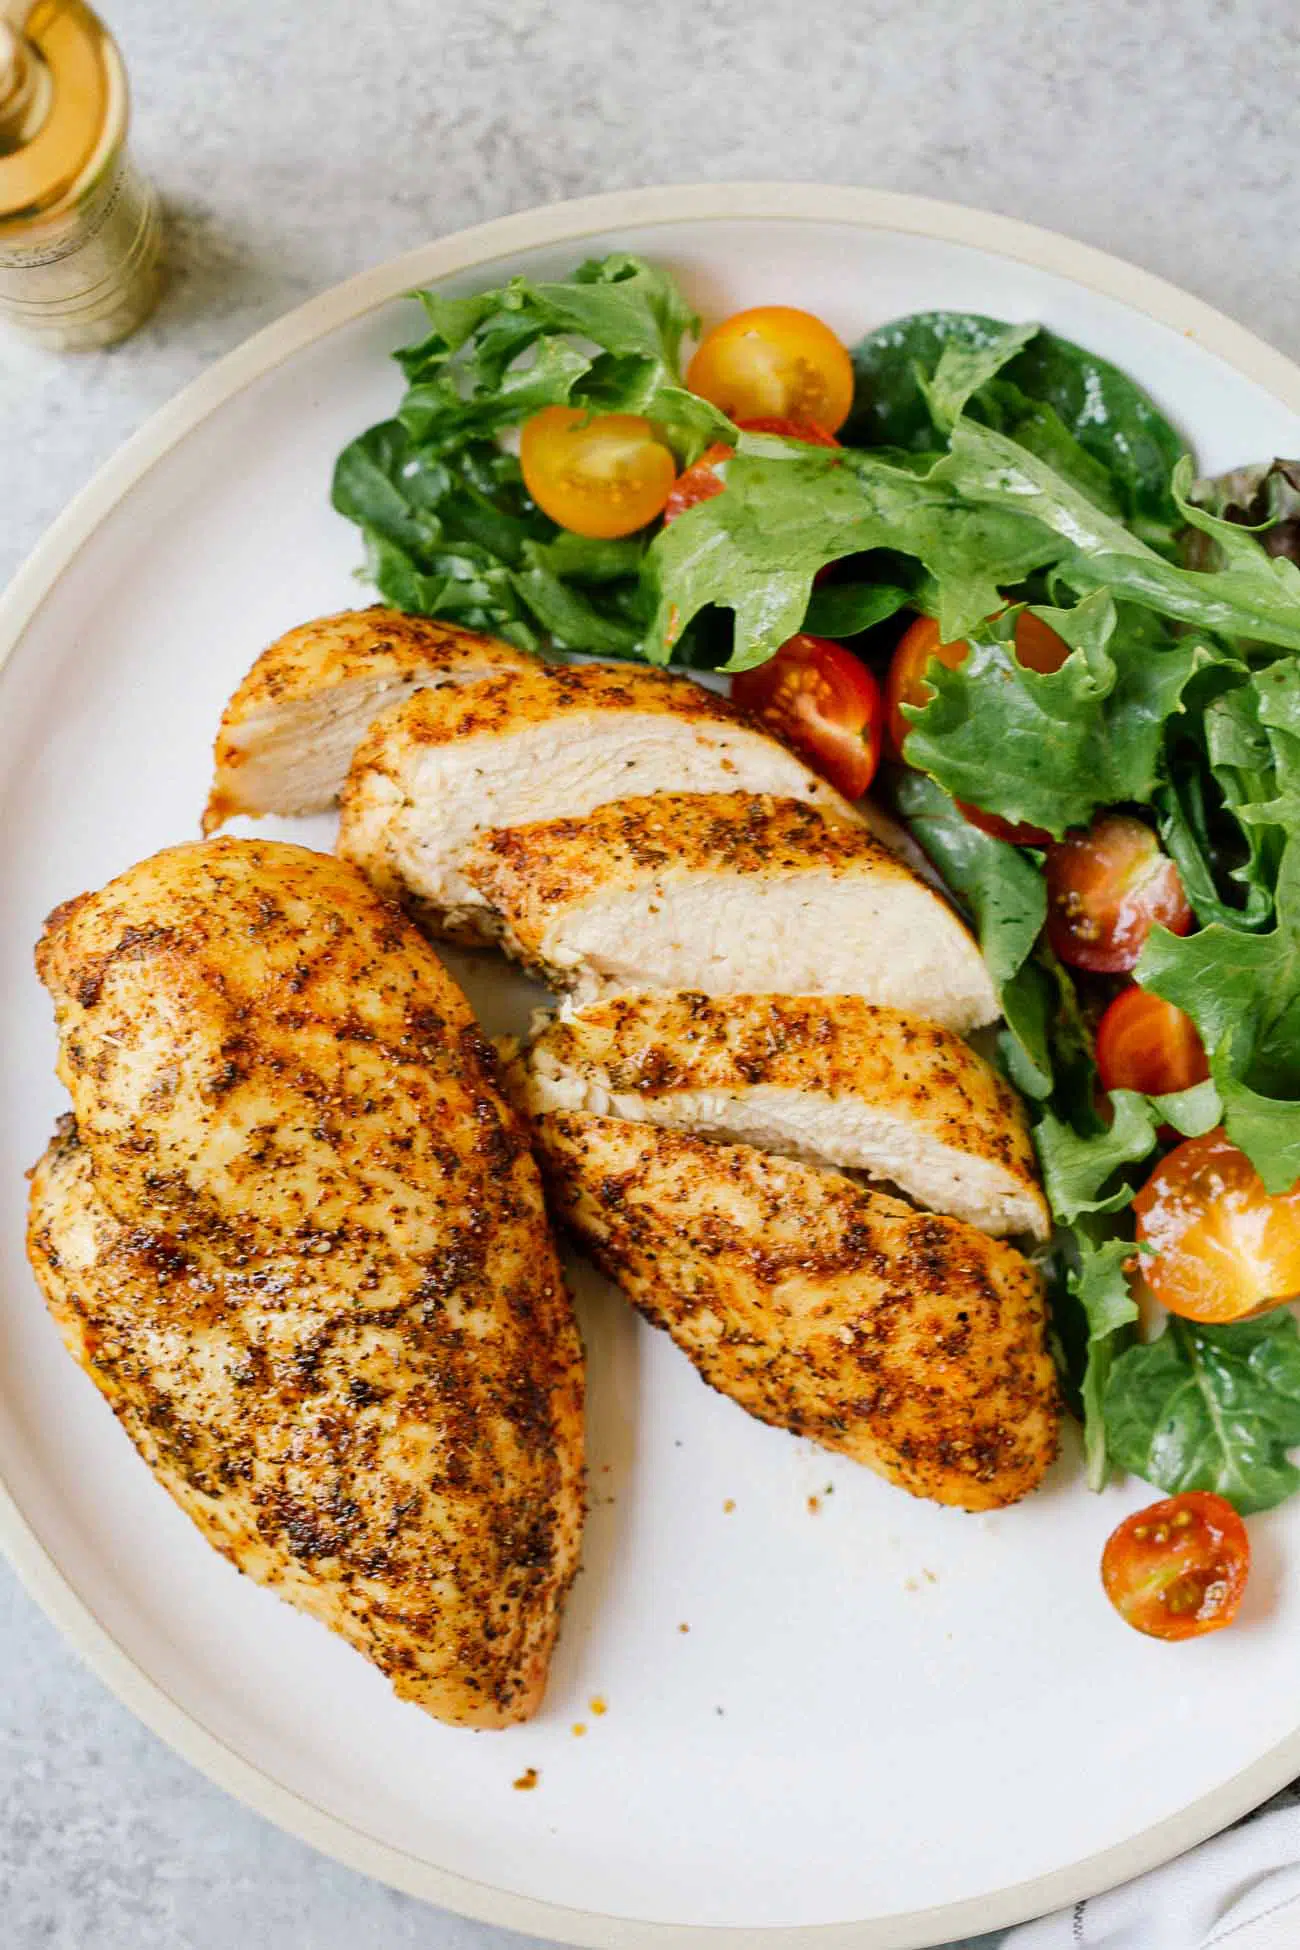 A plate with two chicken breasts, one sliced, beside a salad.